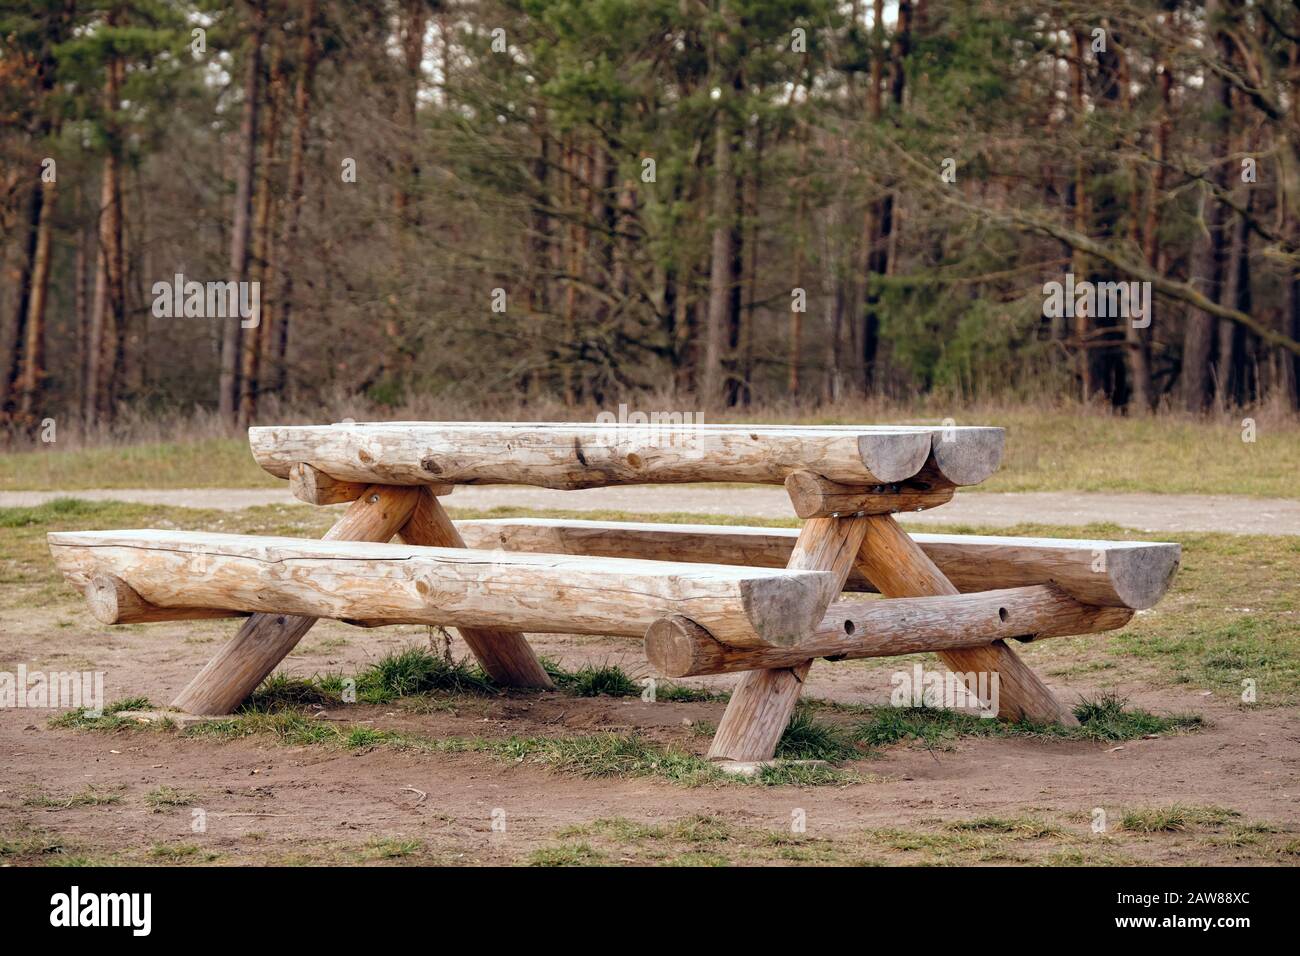 Rustic wooden bench and table combination made of tree trunks on a meadow in front of a forest. Seen in Germany in January Stock Photo